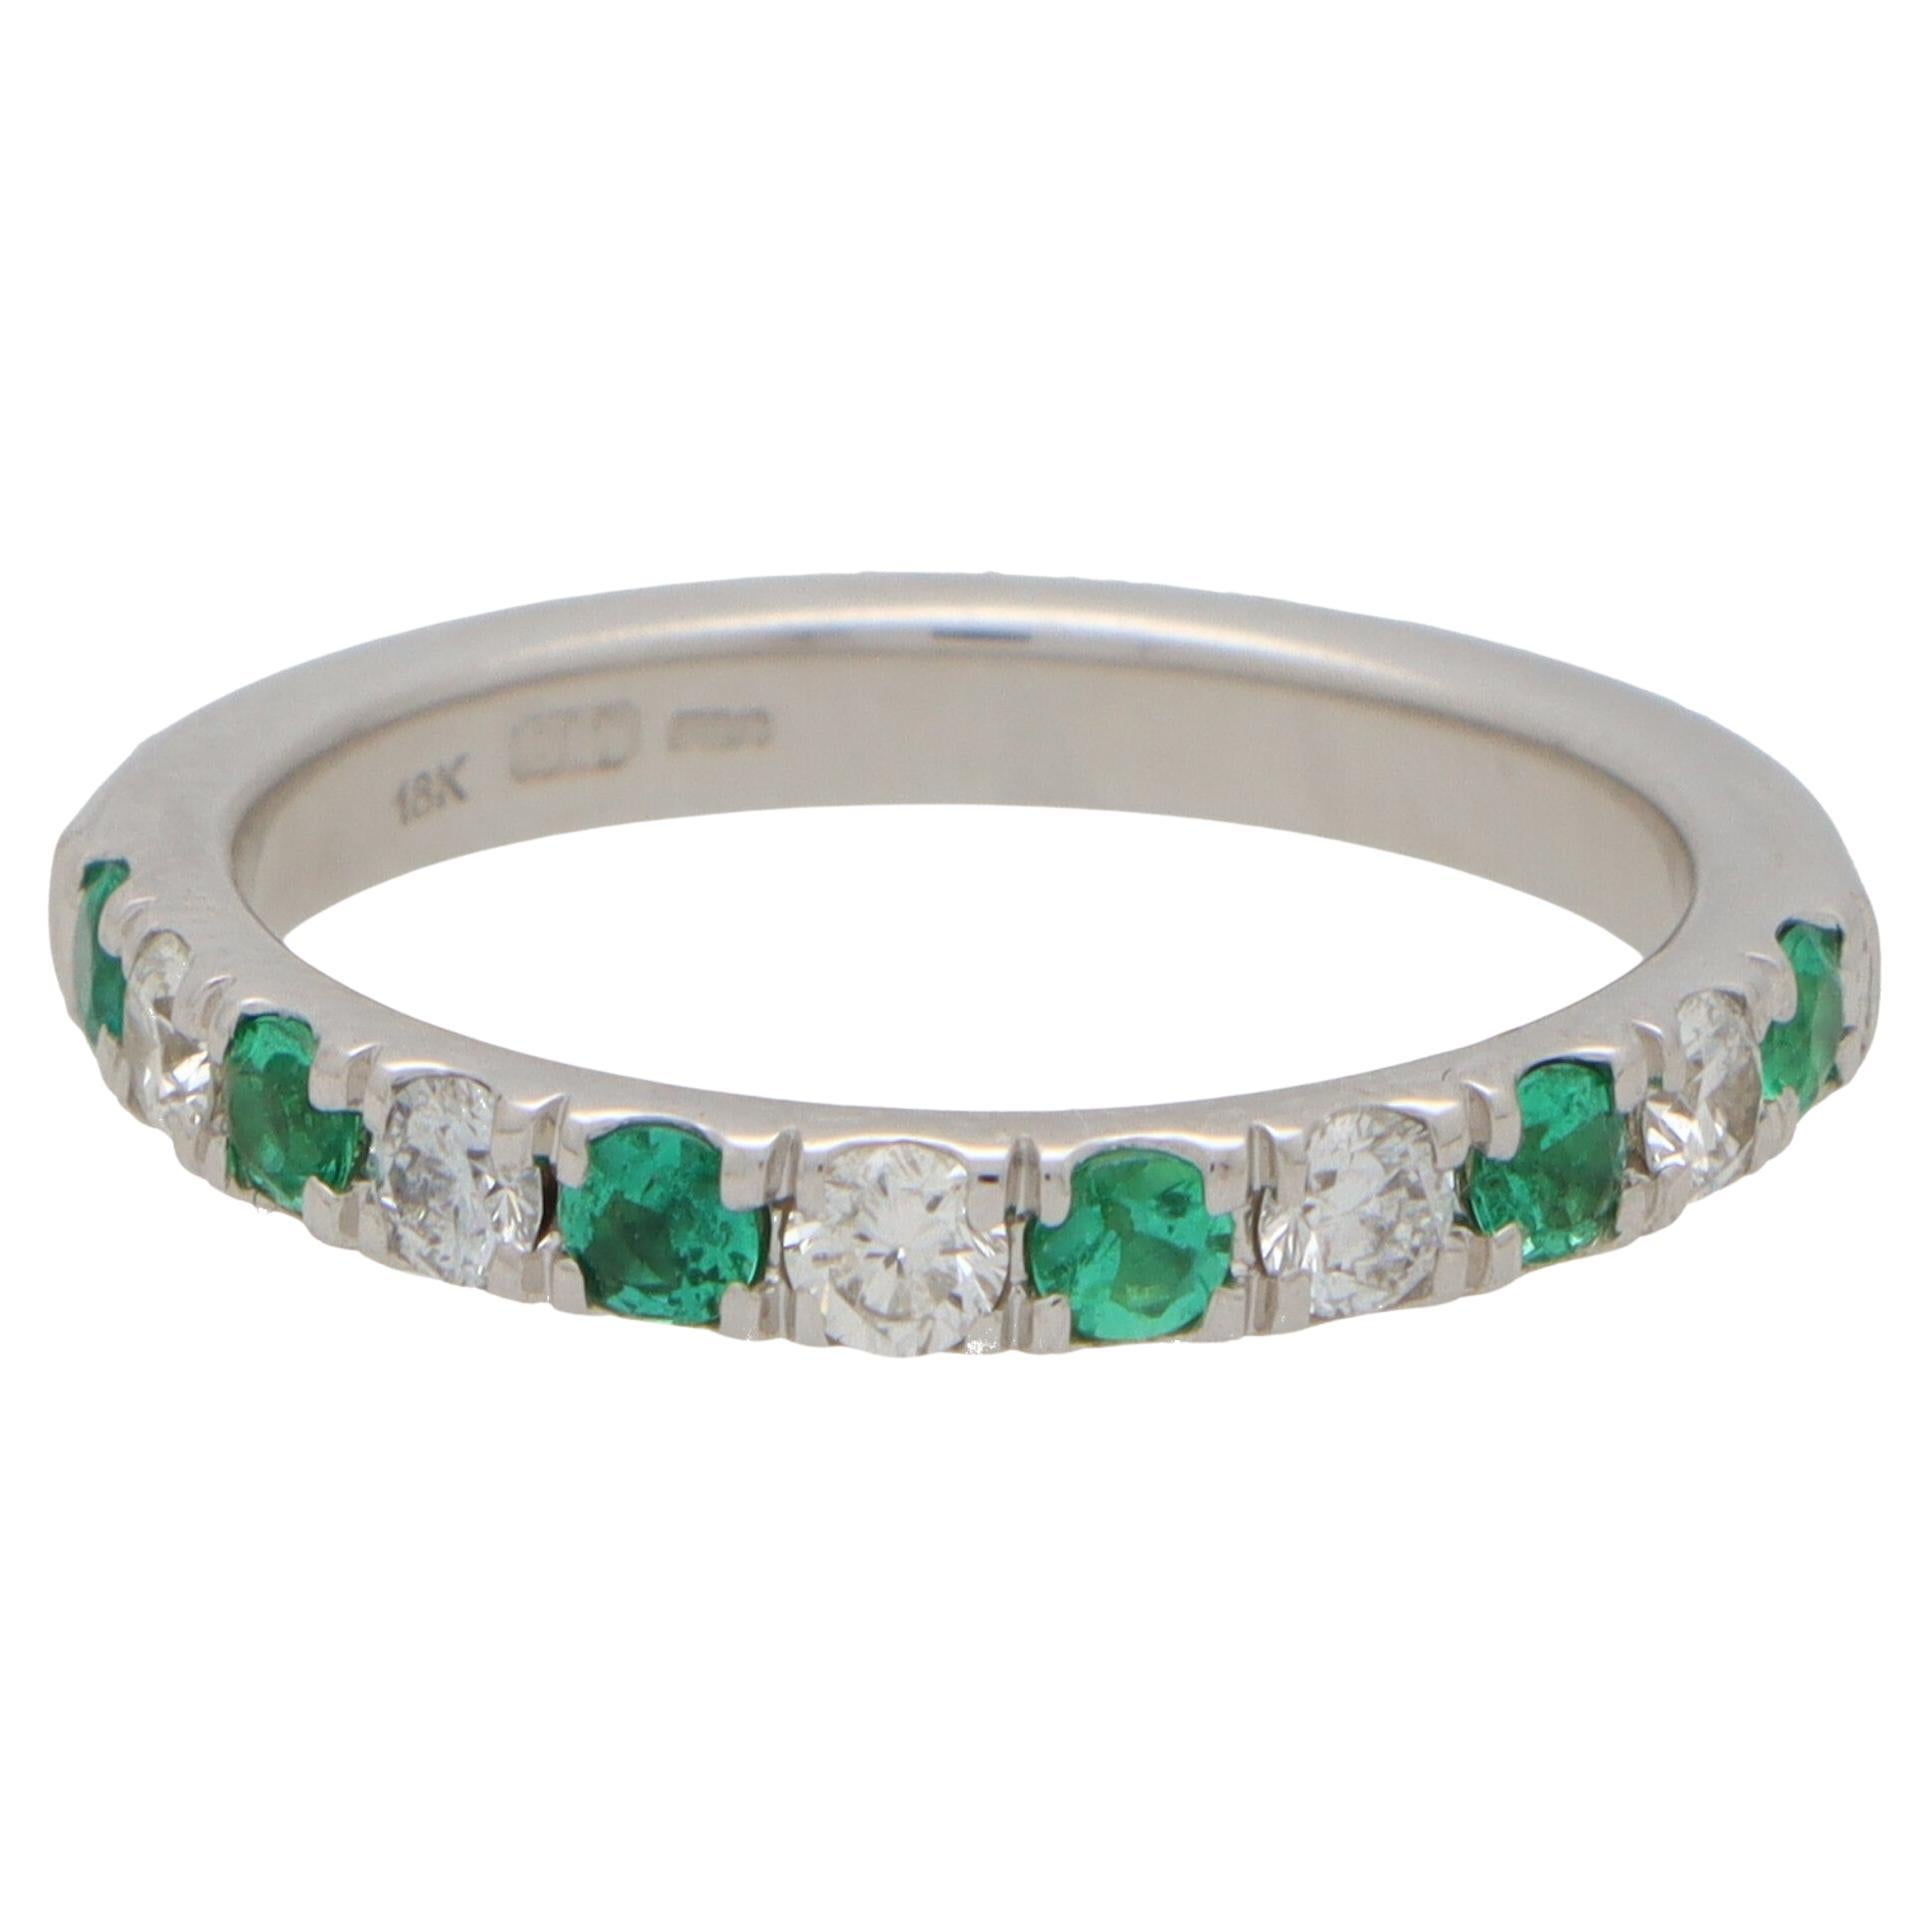 Contemporary Emerald and Diamond Half Eternity Band Ring in 18k White Gold